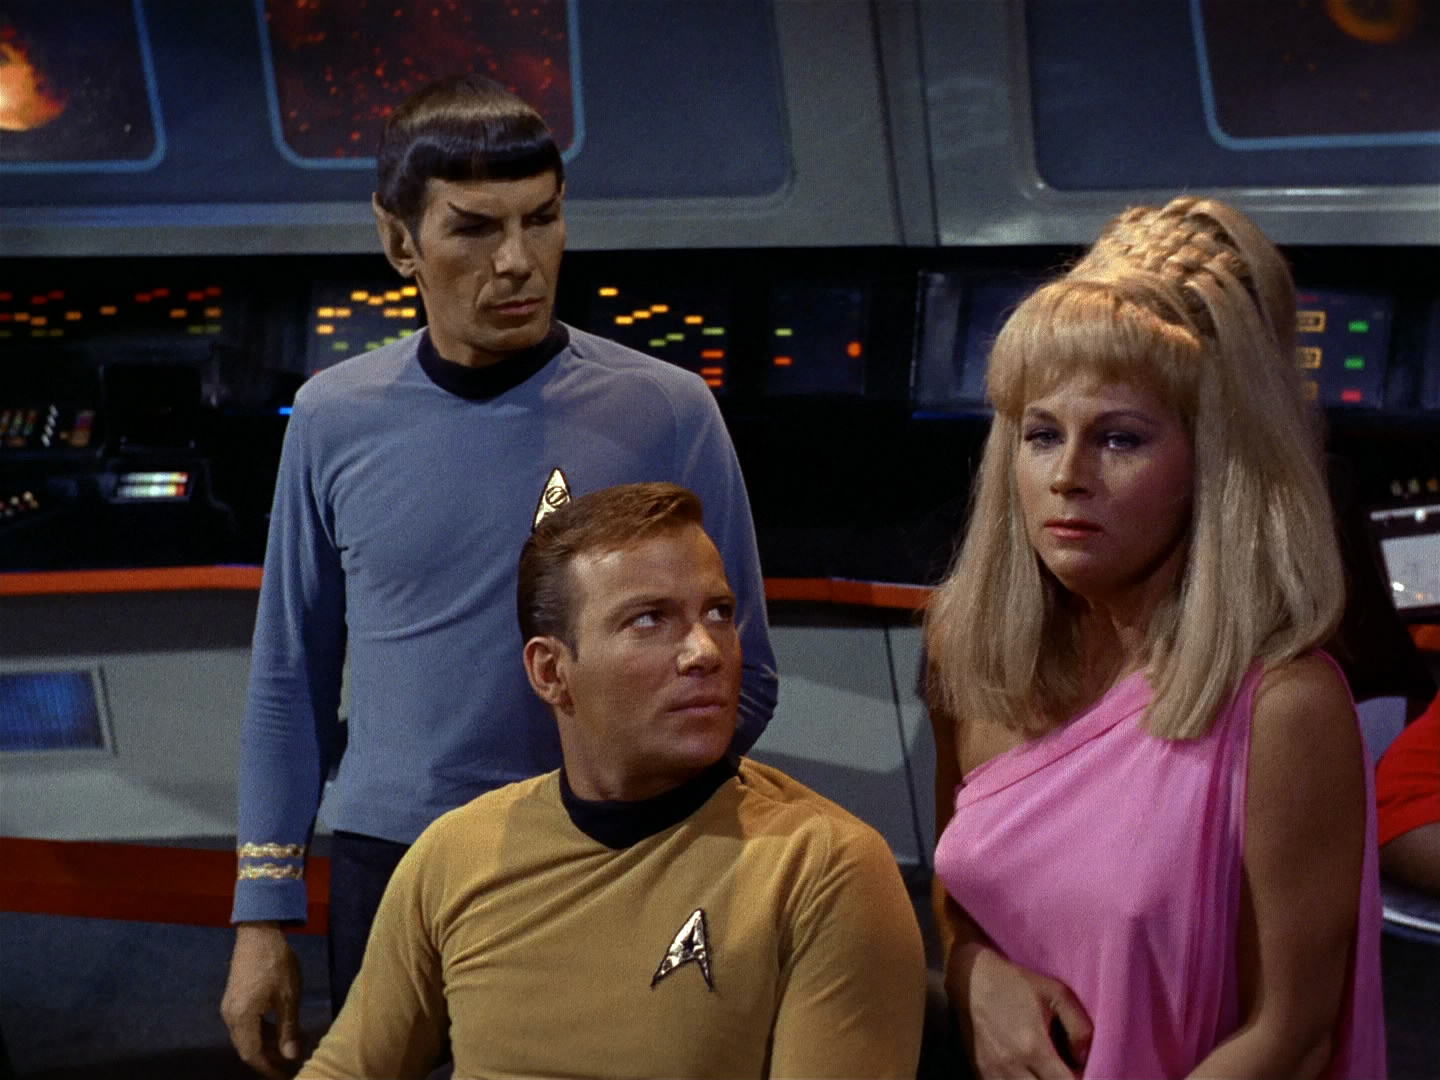 How did I forget Yeoman Rand... 